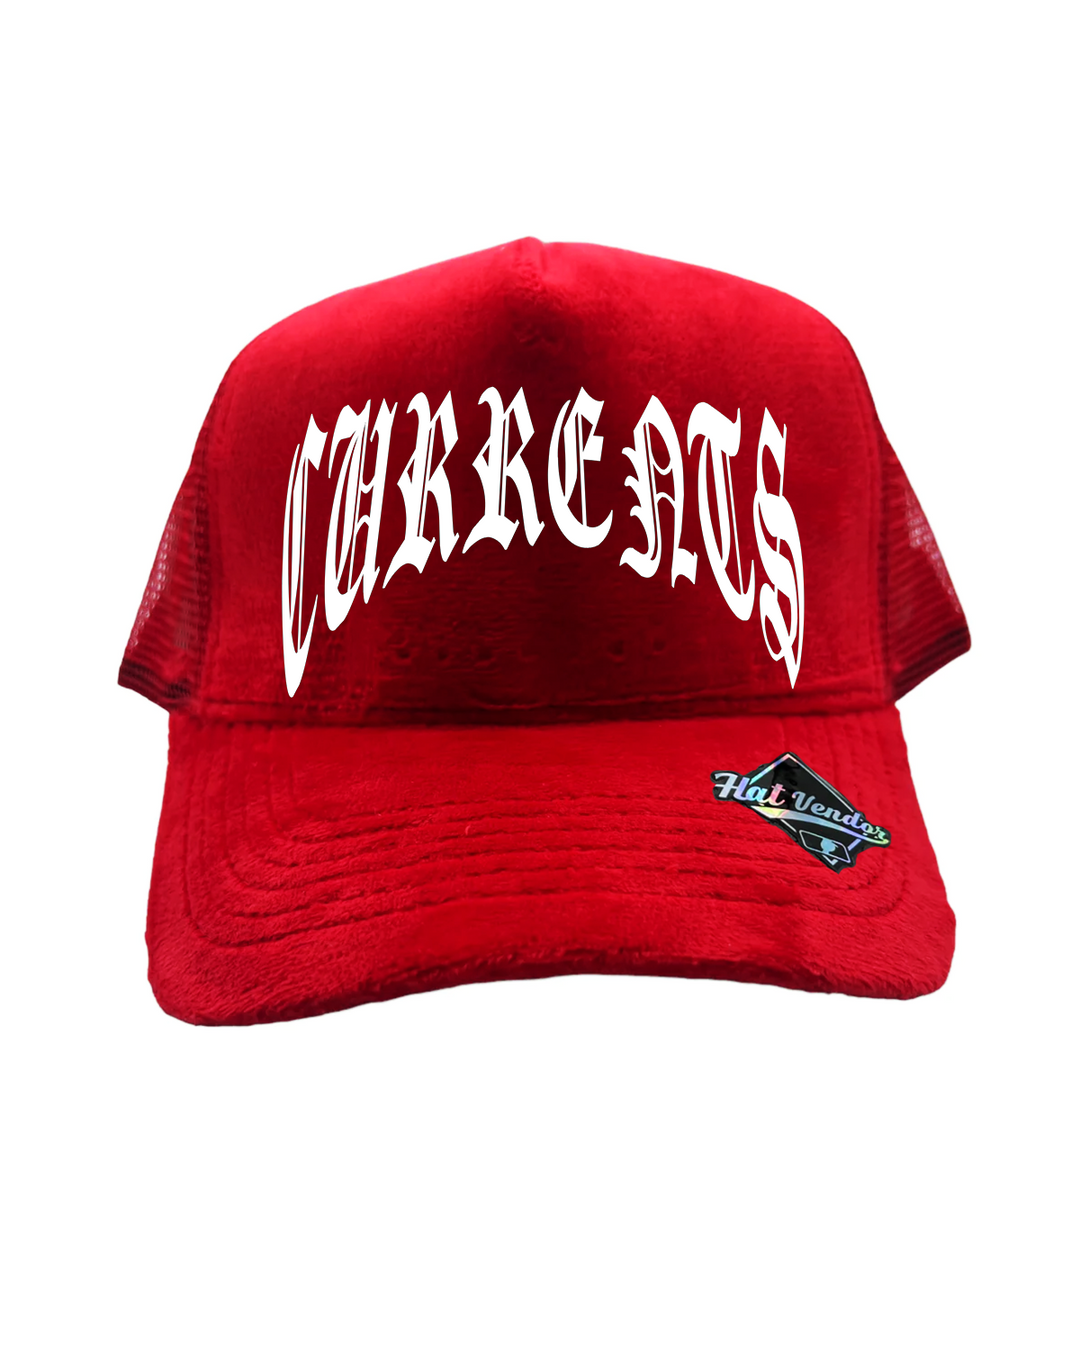 Currents Red Suede Truckers Hat